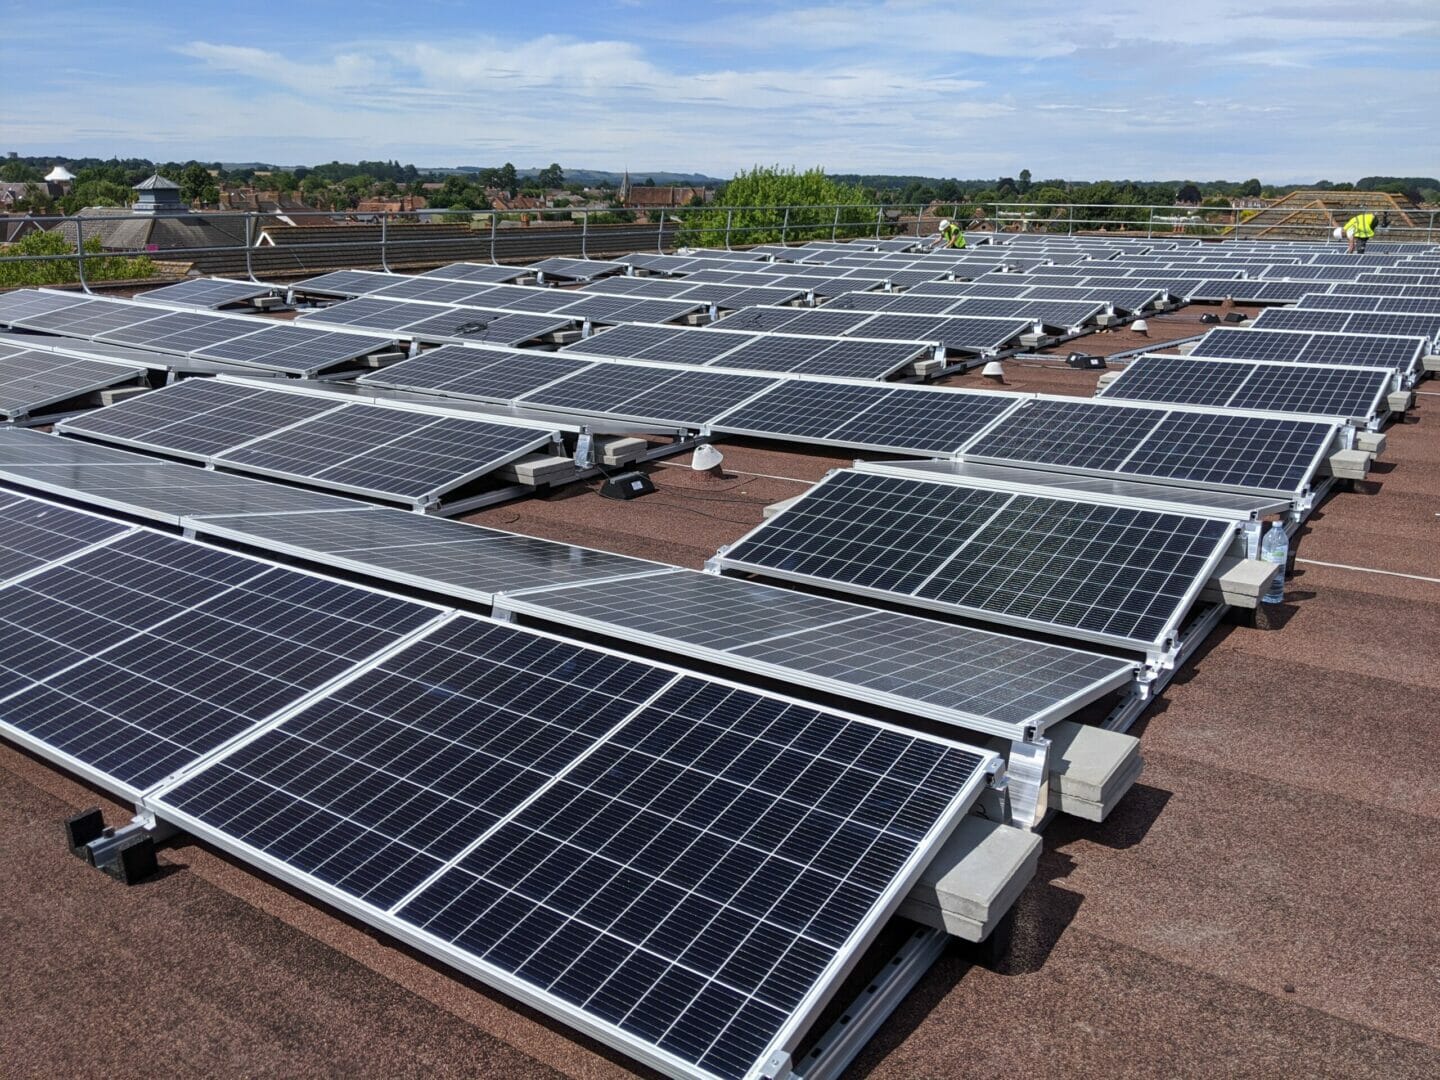 Mace shines brightest to secure council solar project  @MaceGroup